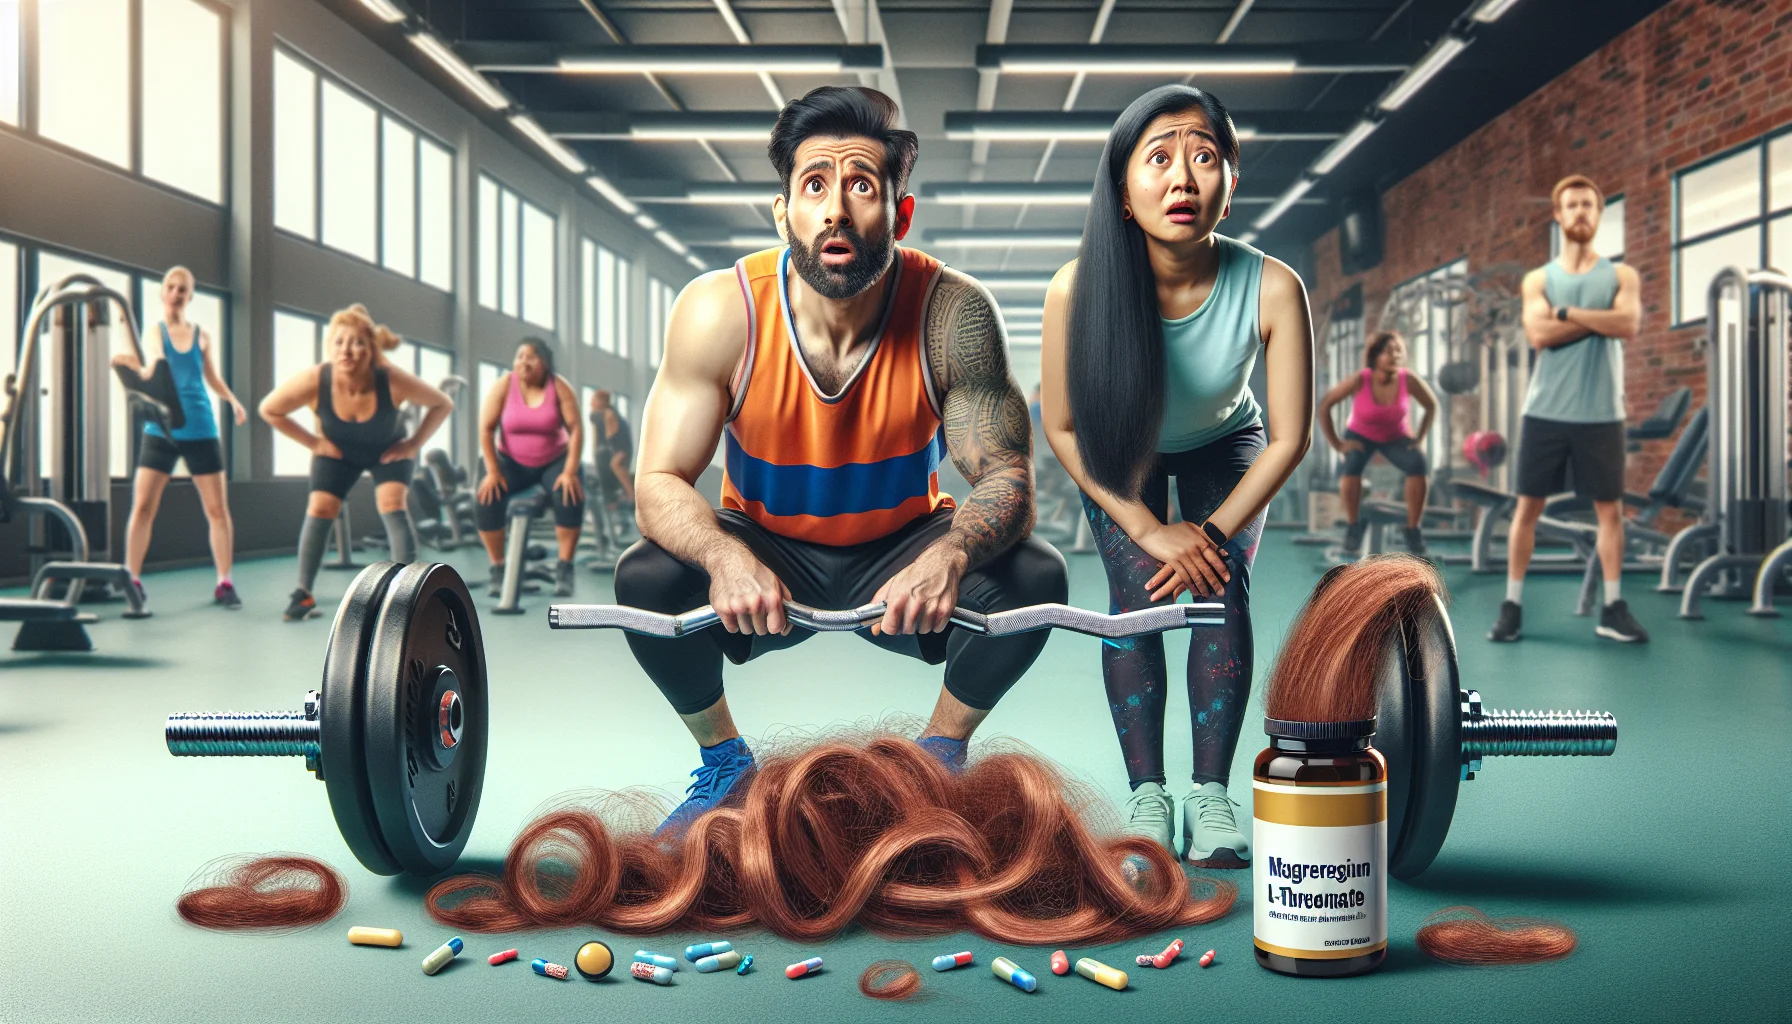 Create an imaginative yet humorous scenario in which a noticeably fit caucasian male and a south asian woman, both sporting active gym clothes, stare in disbelief at a barbell, in which bands of hair are tangled up, implying hair loss. Nested on the floor next to them is a bottle of magnesium l-threonate, suggesting the use of supplements. The background is a gym full of diverse people working out, with a comic touch of various sports equipment sprouting strands of hair.